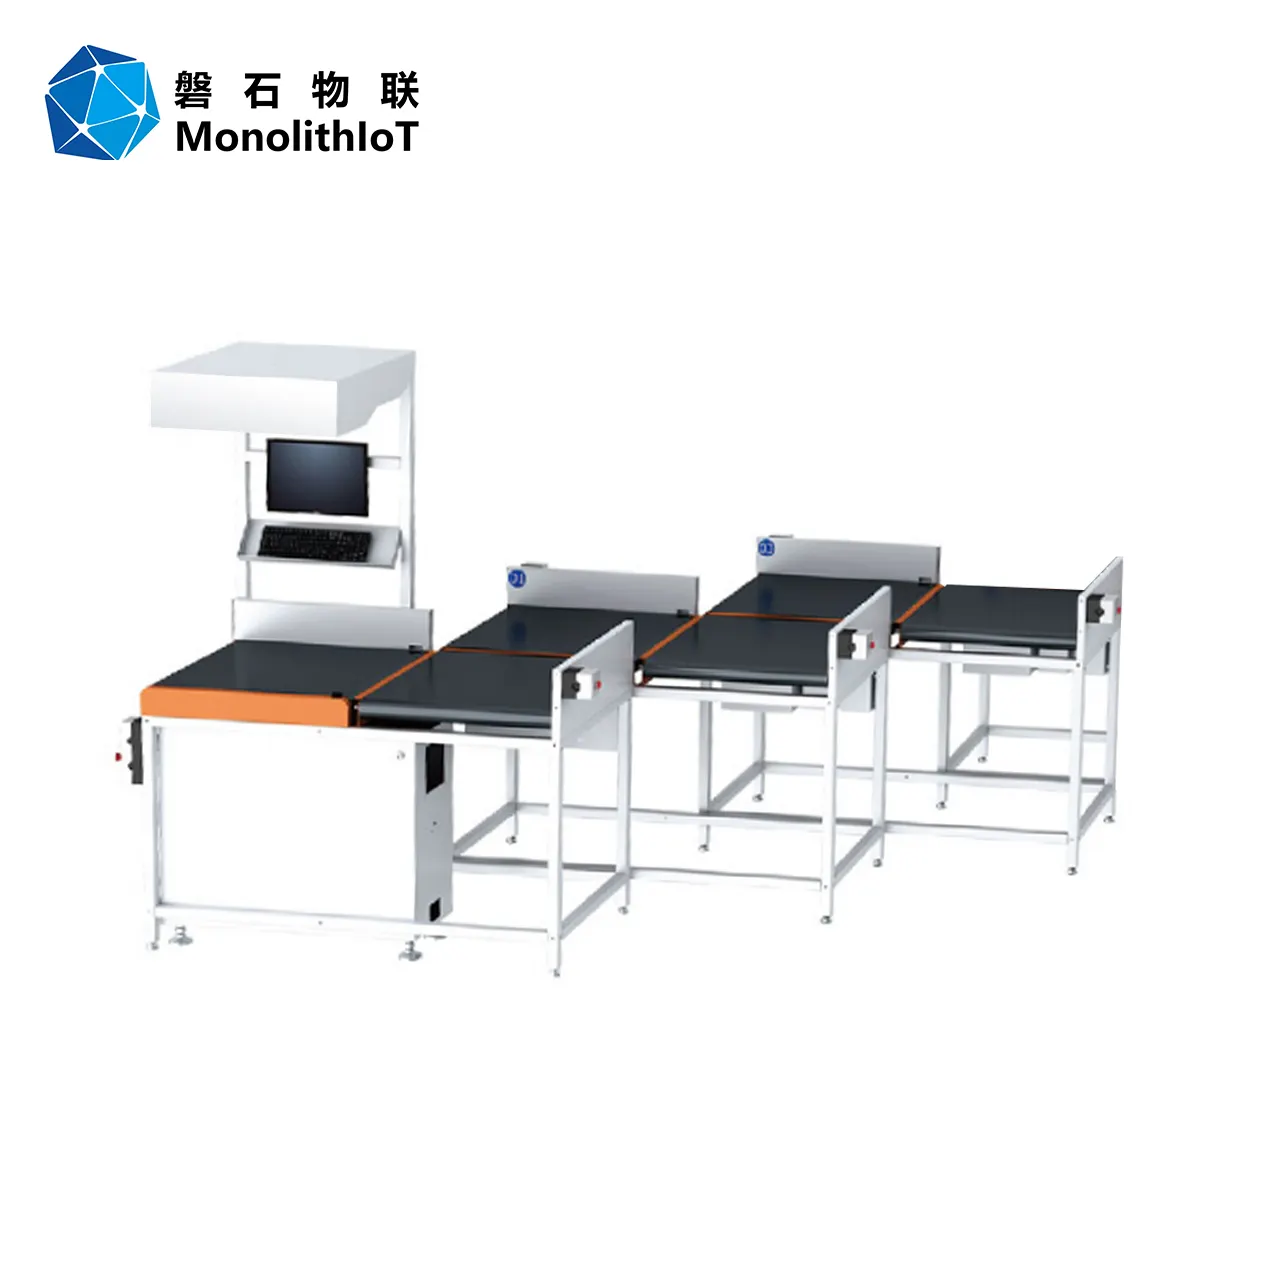 Zigzag Sorting System 30 outfeeds DWS scanning weighing warehouse and storage Integrated automation belt conveyor 3PL warehouse